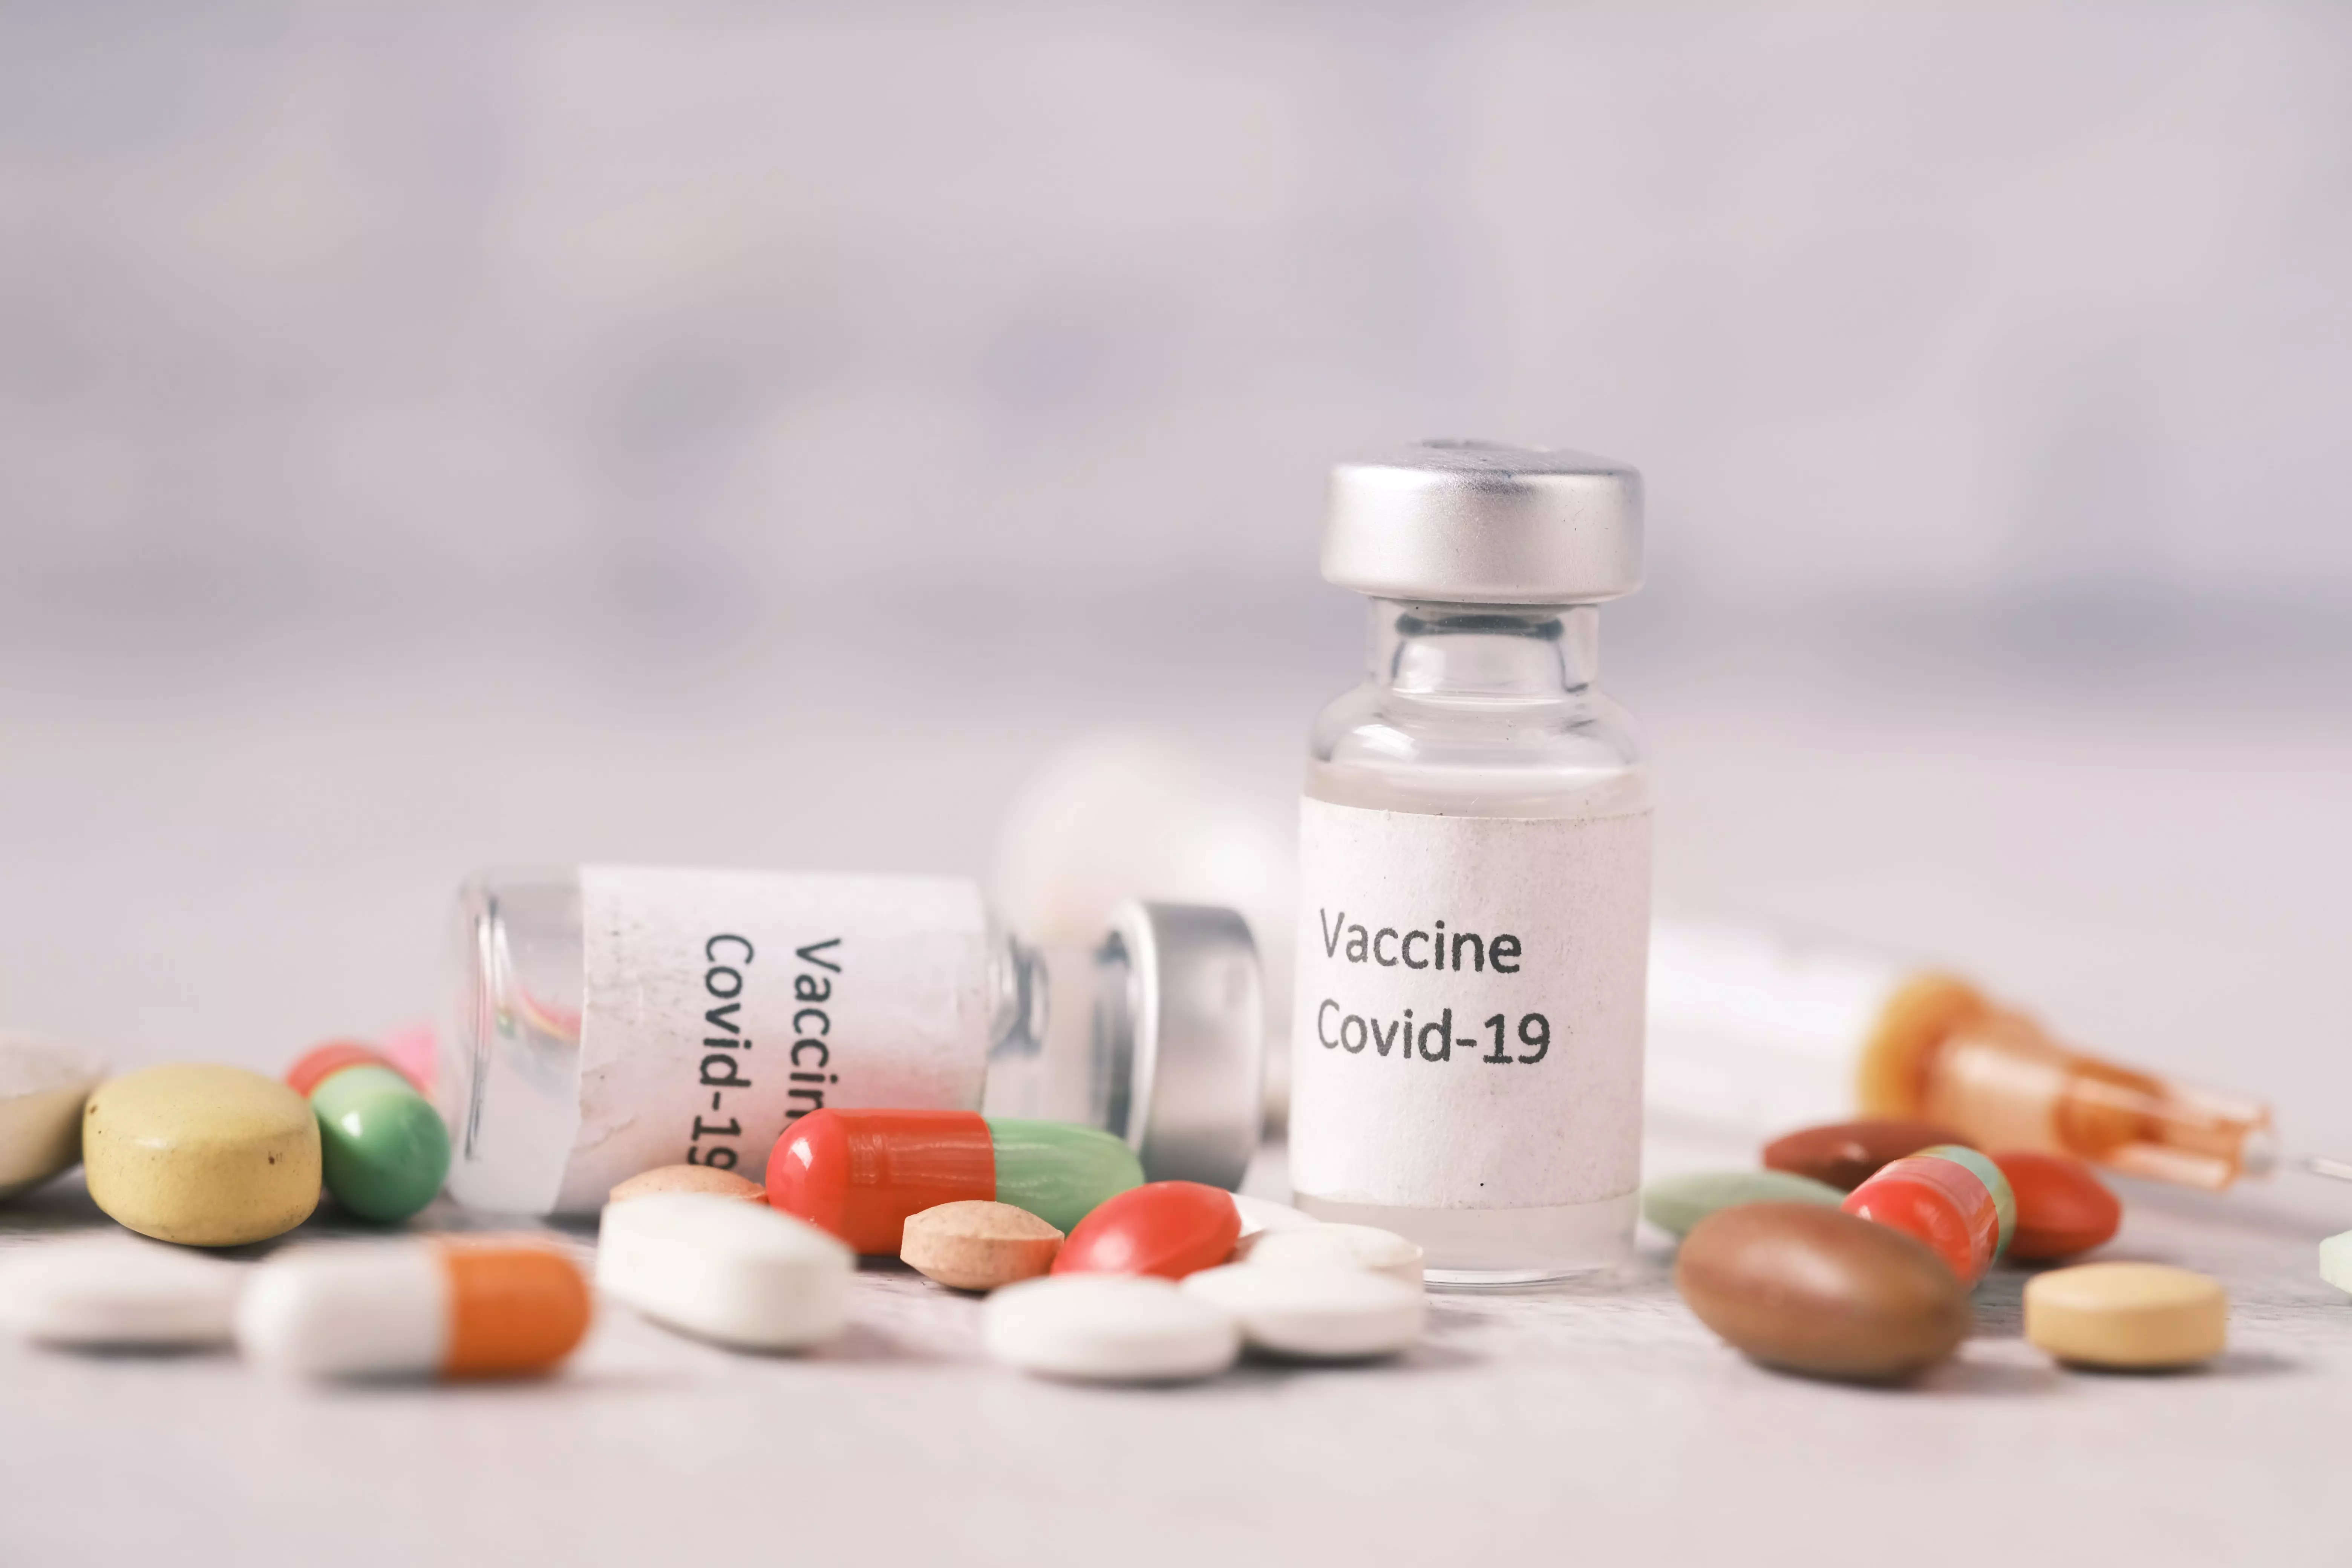 Sudden COVID-19 outbreaks depict lack of efficacy of Chinese vaccines: Report